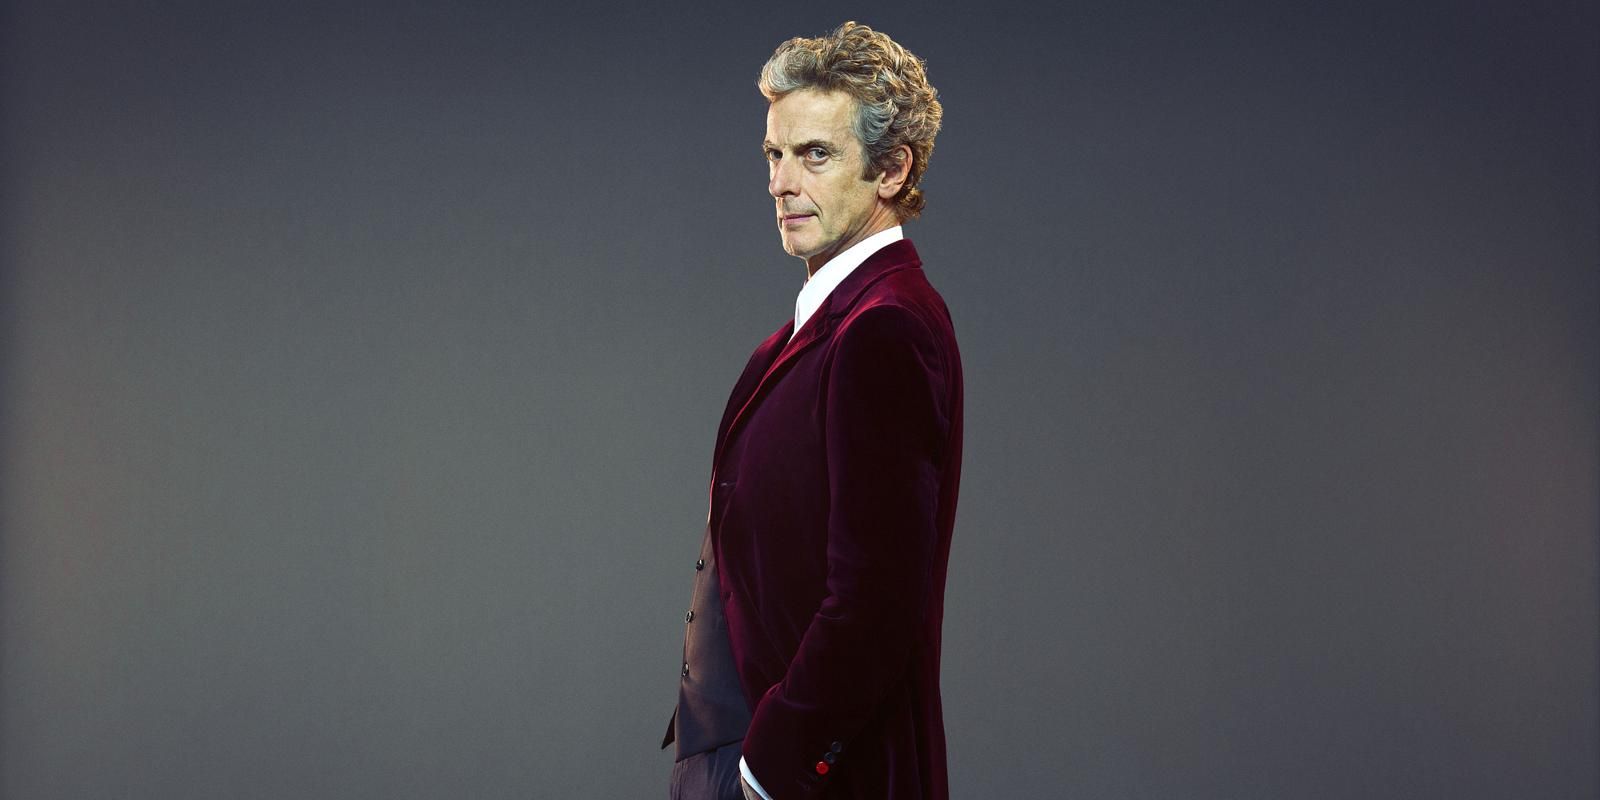 The Twelfth Doctor standing against a grey background